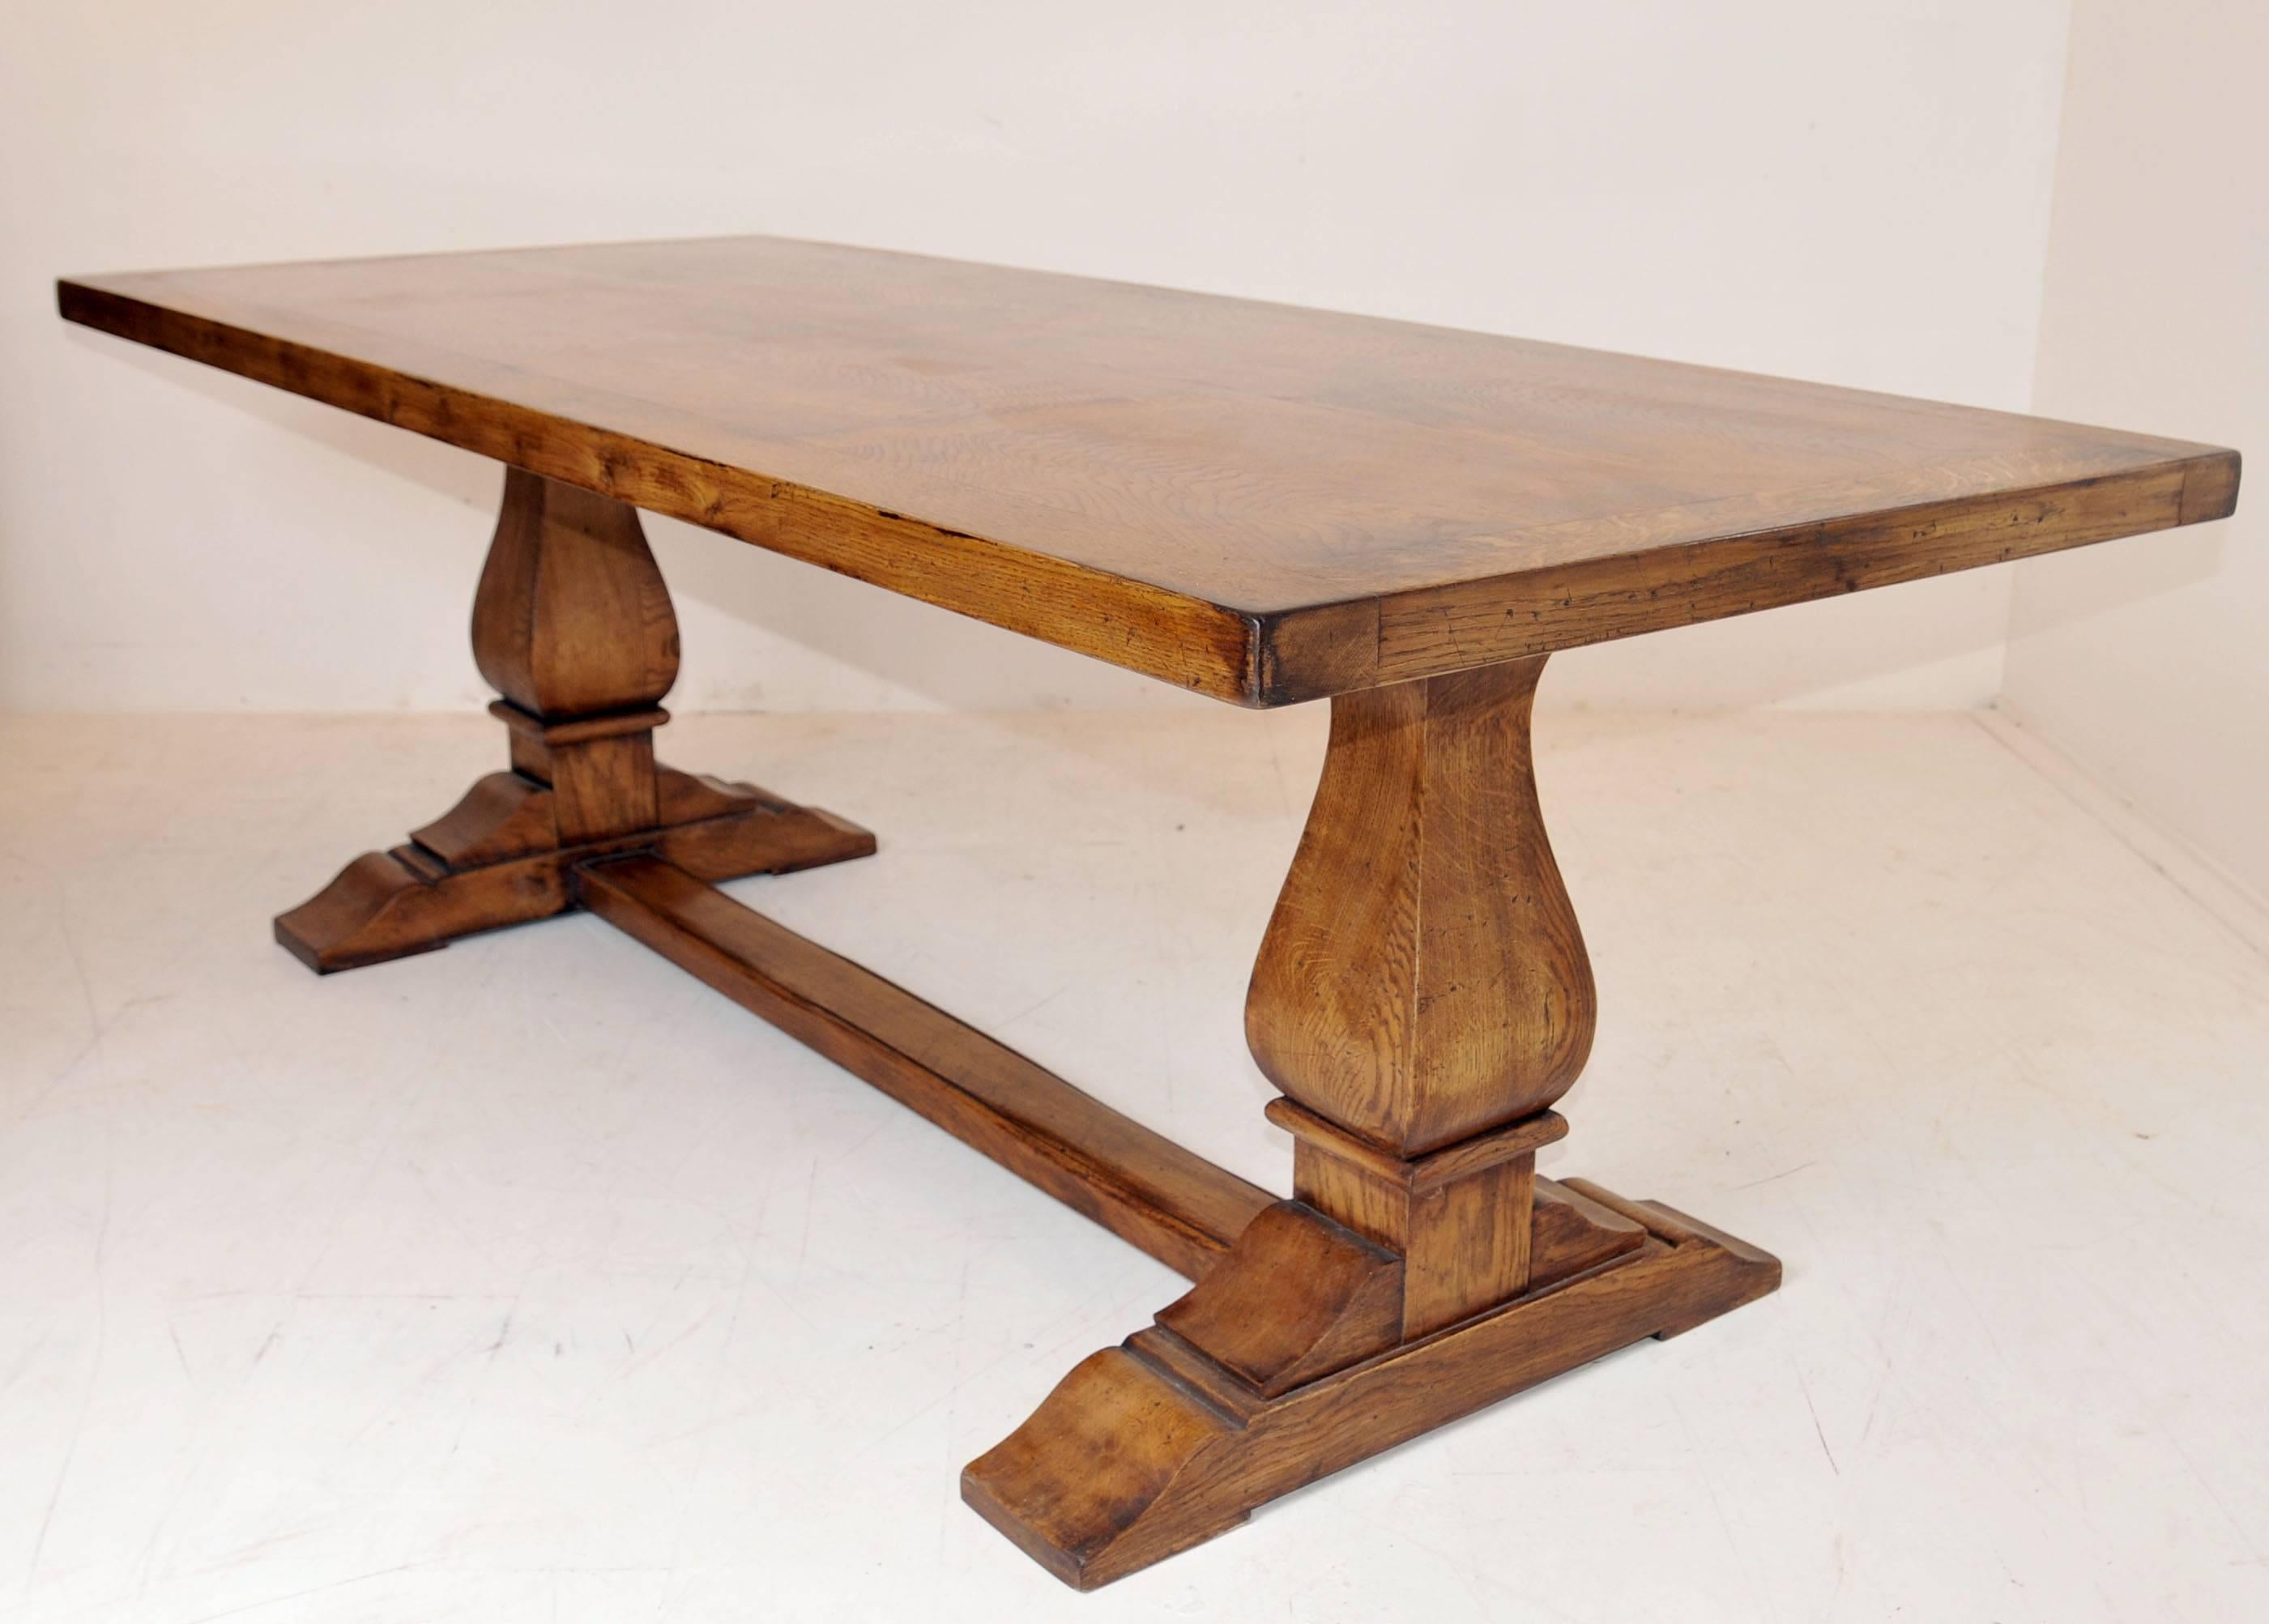 Gorgeous English farmhouse oak refectory table.
Solid and chunky piece, very thick solid oak top and legs.
Great look, perfect for that cosy farmhouse look.
We have various suitable matching farmhouse chairs - Windsors, ladderbacks, spindlebacks